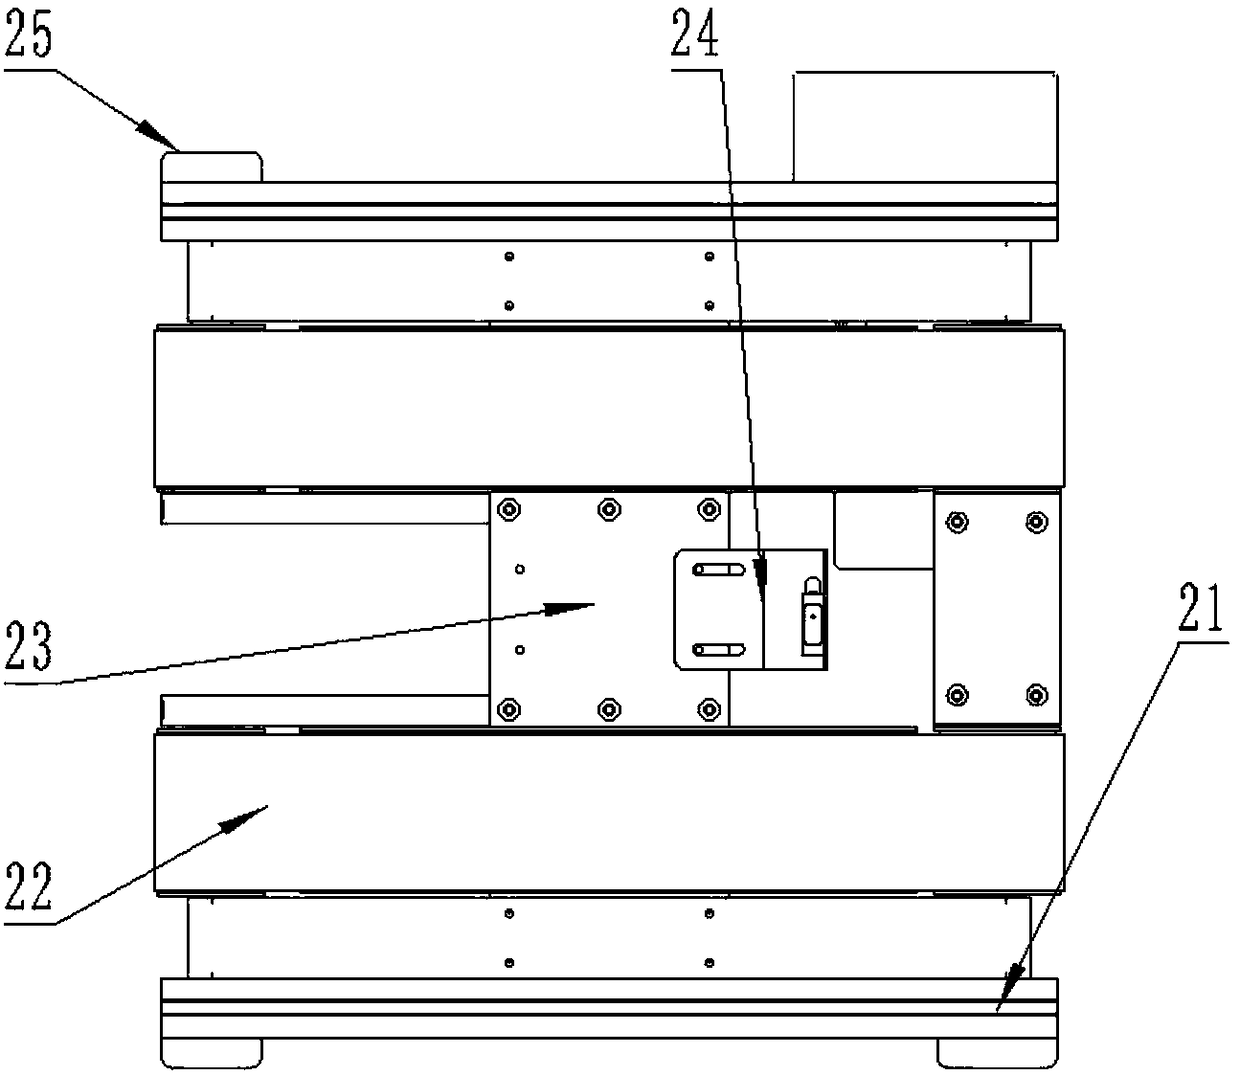 Automatic cross-shaped strapping machine for envelopes and cards